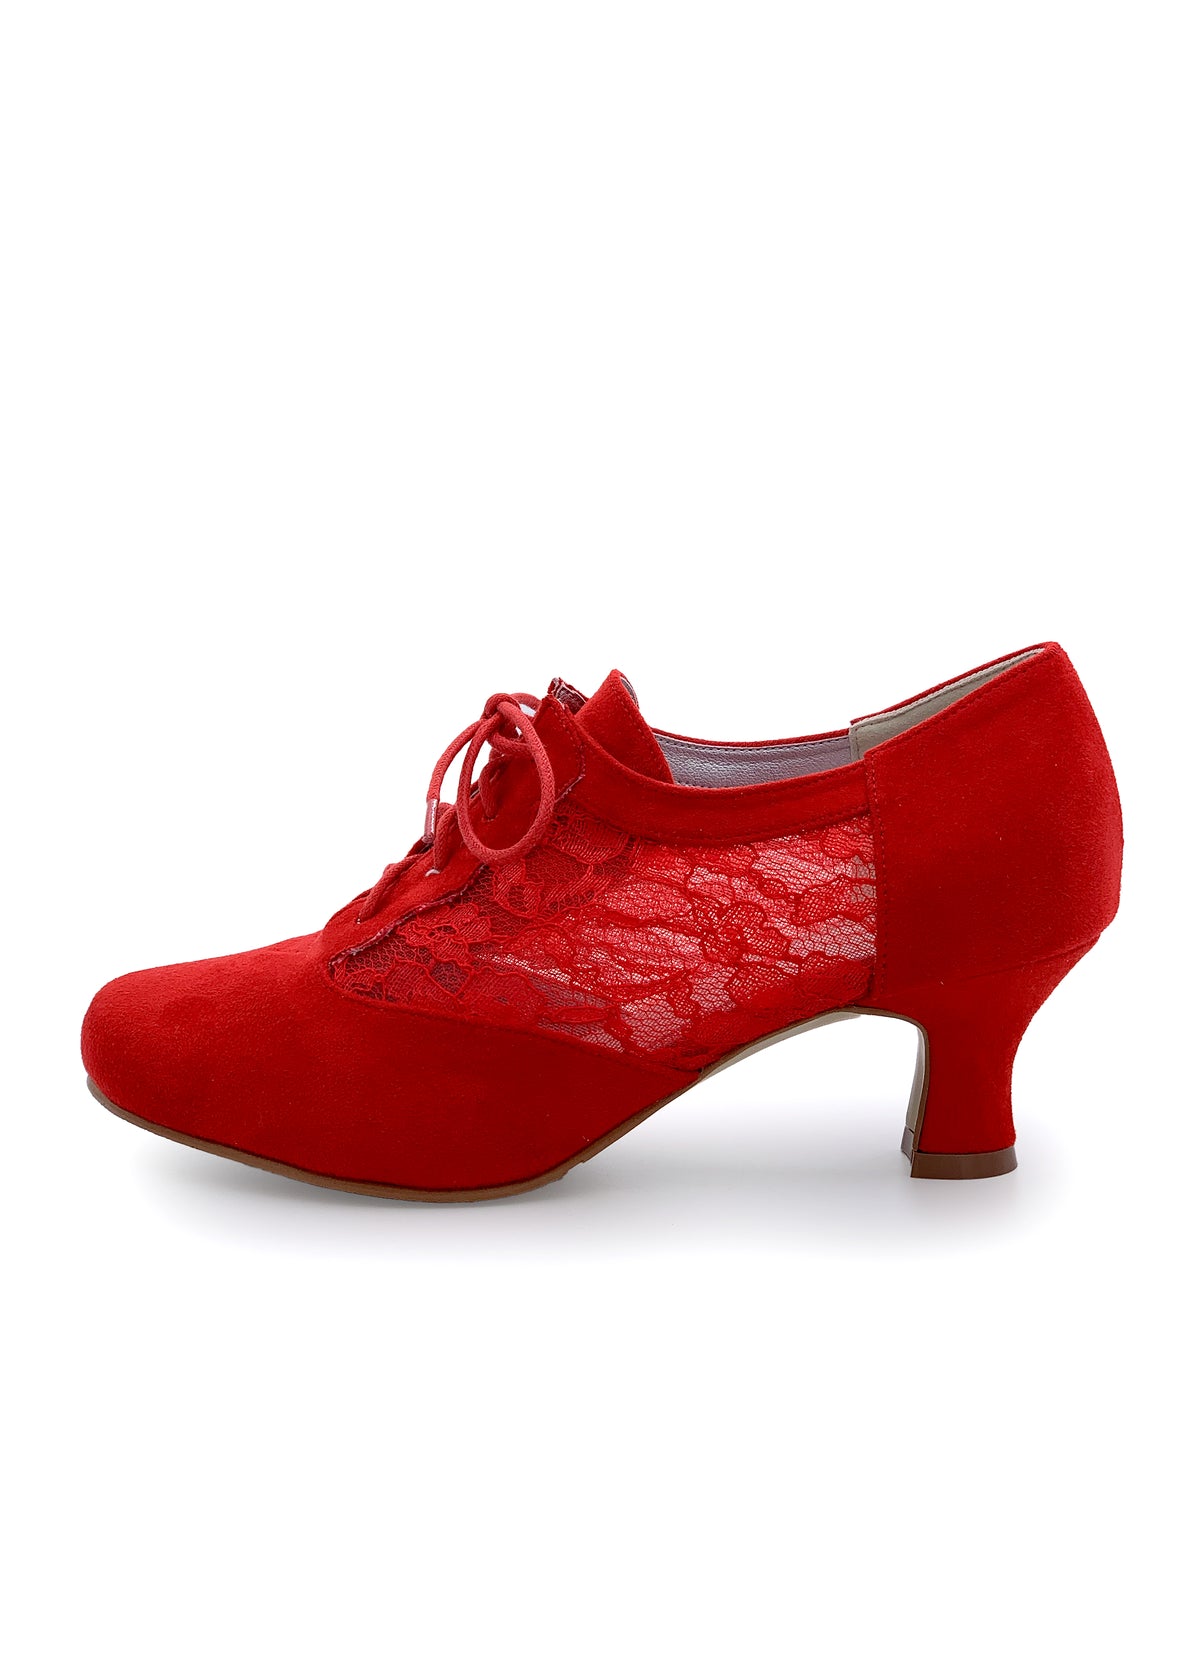 Party Walking shoes - red fabric, lace on the sides, wide sole